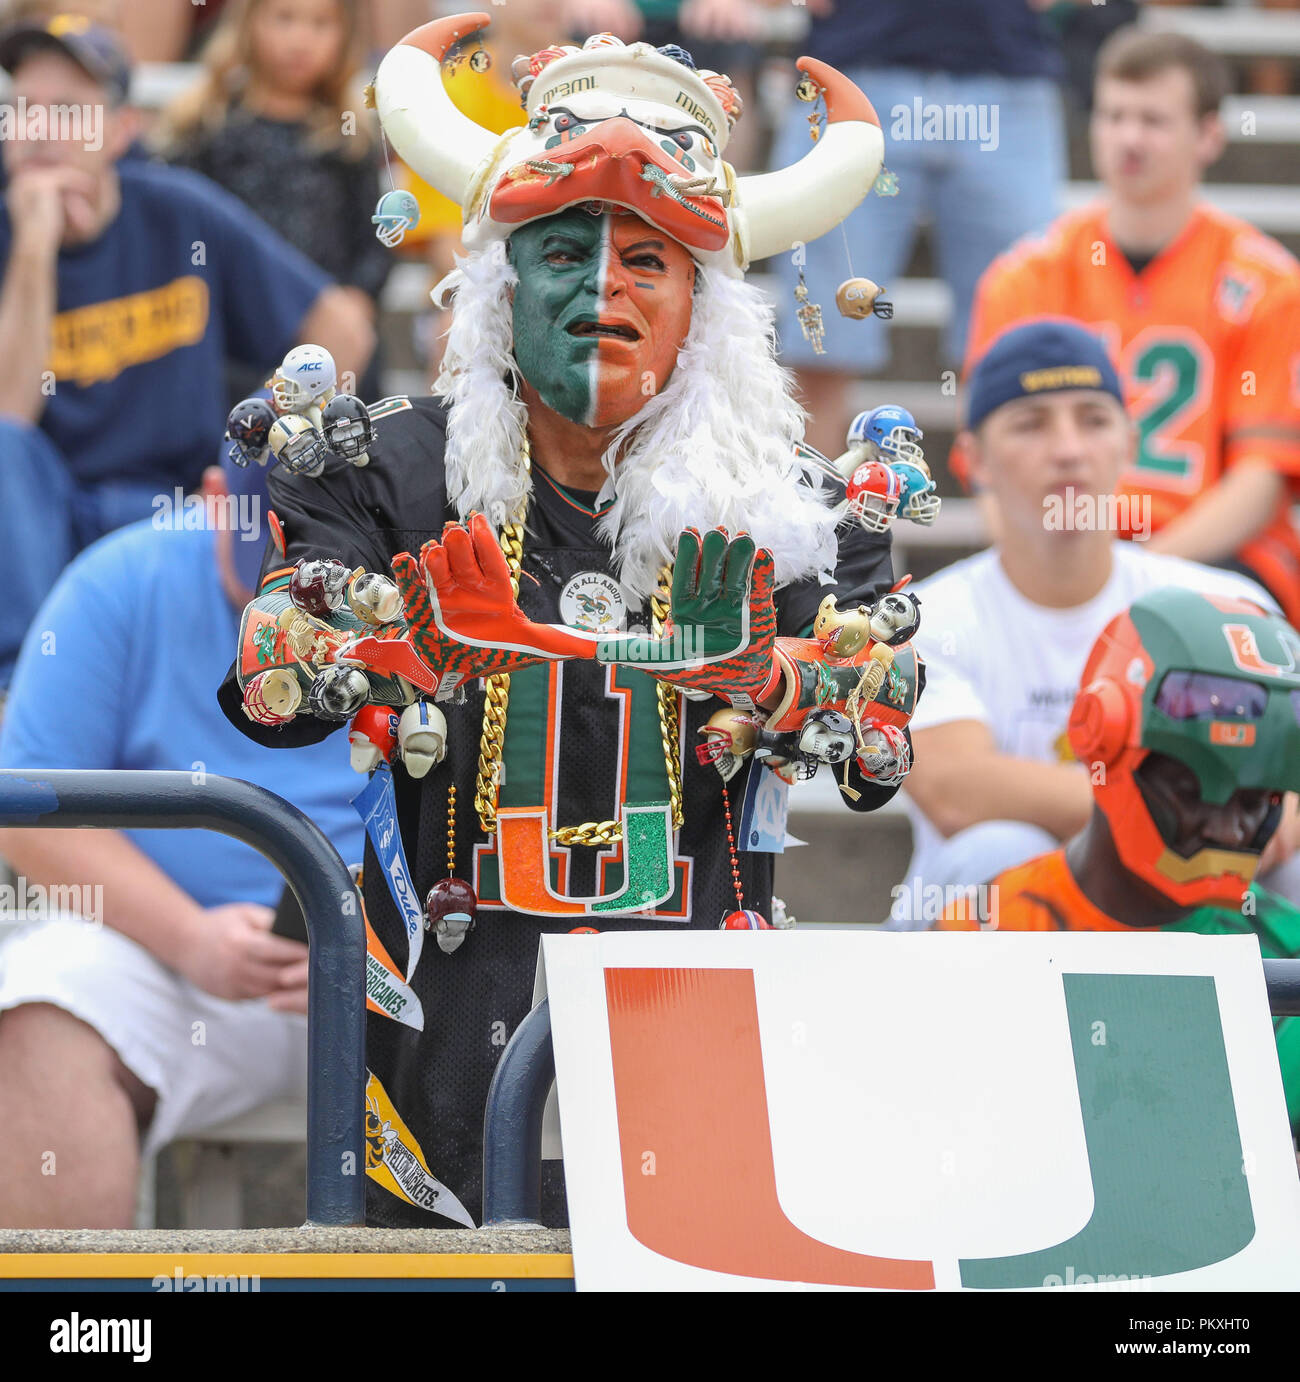 Toledo, Ohio, USA. 15th Sep, 2018. An enthusiastic Miami fan in the stands prior to the NCAA Football game between the Toledo Rockets and the Miami Hurricanes at the Glass Bowl in Toledo, Ohio. Kyle Okita/CSM/Alamy Live News Stock Photo